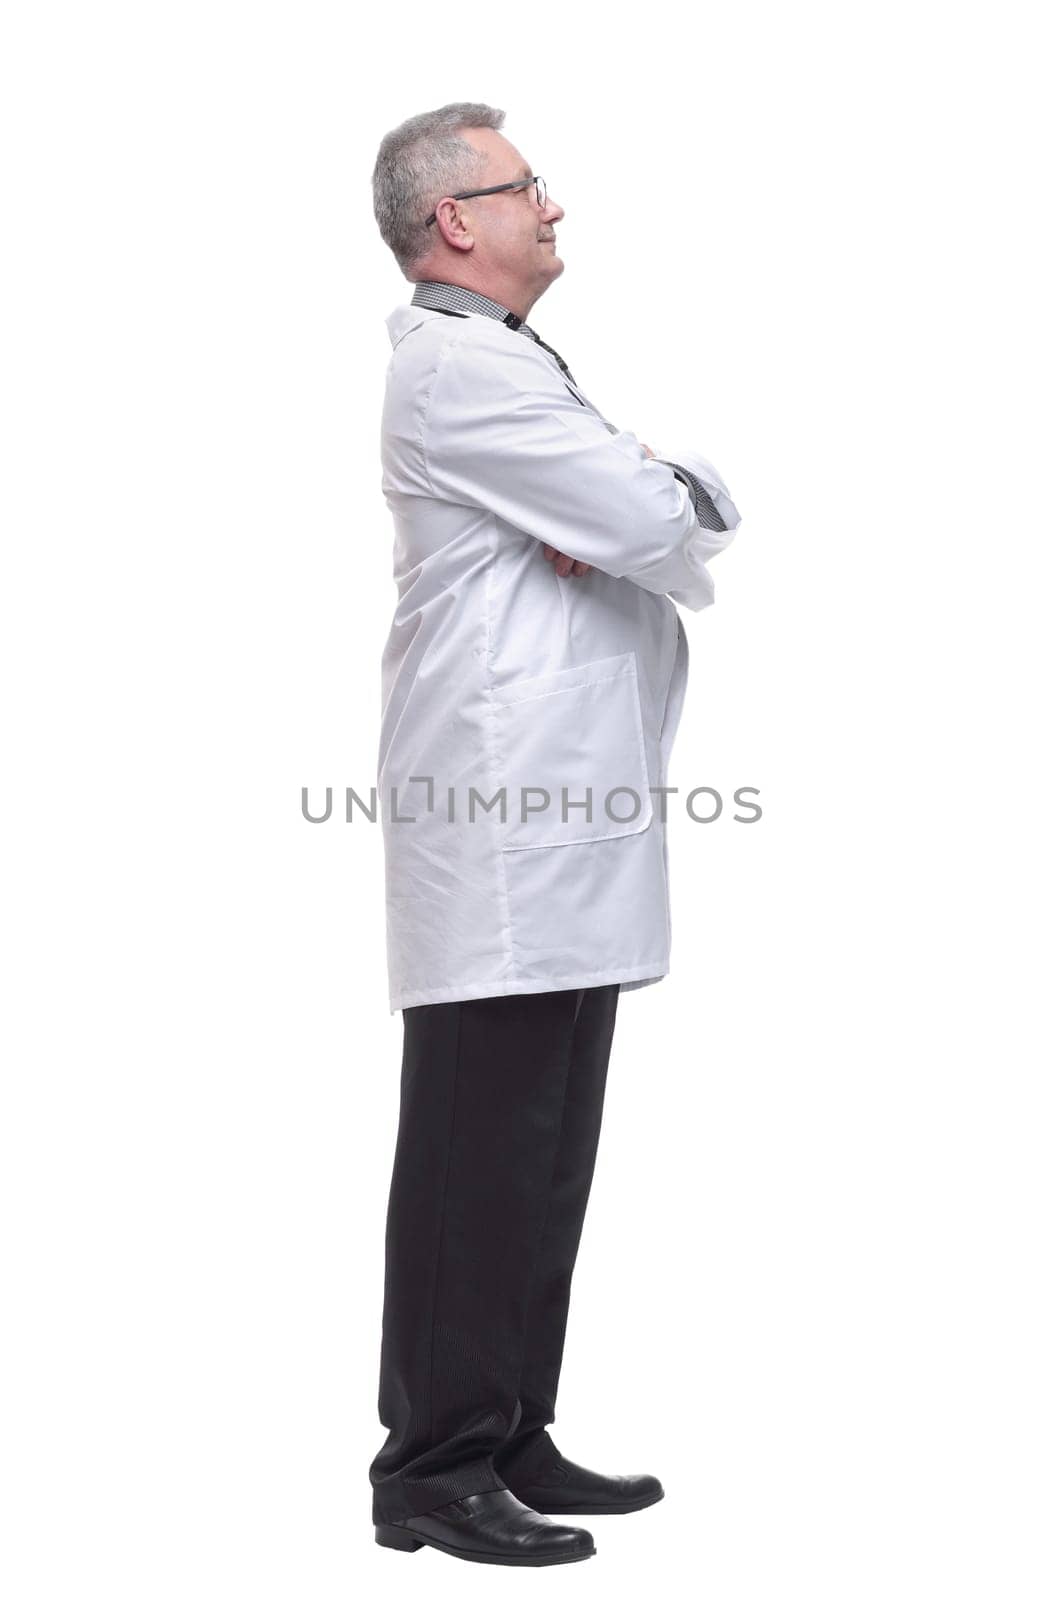 Professional doctor with stethoscope and wearing glasses in a side view image over white background